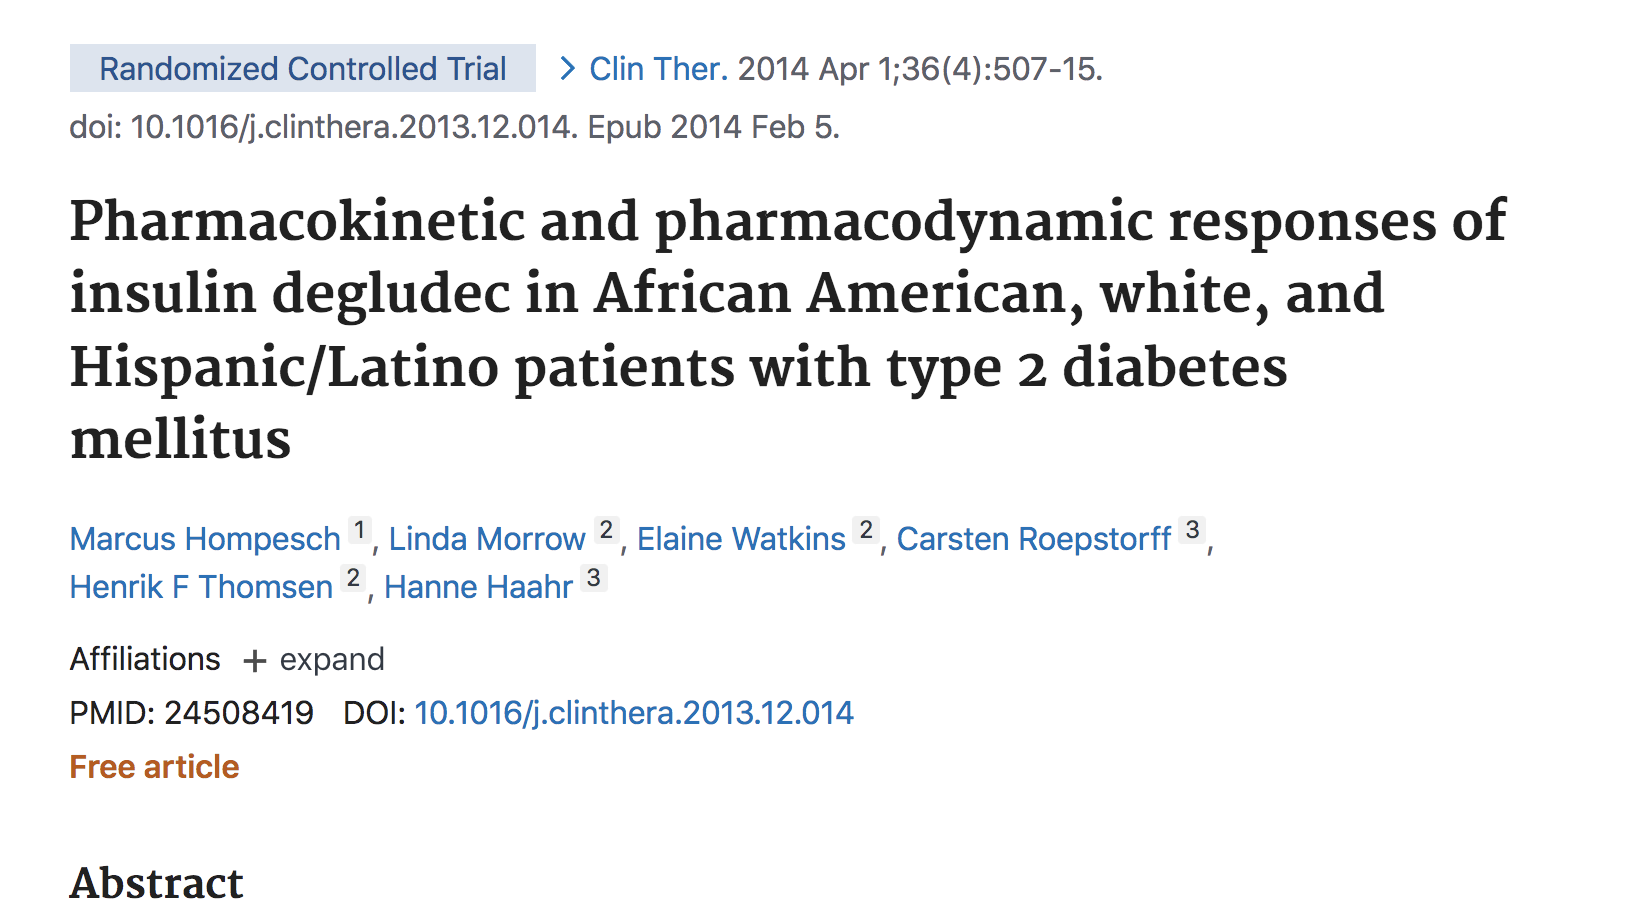 image of Pharmacokinetic and Pharmacodynamic Responses of Insulin Degludec in African American, White, and Hispanic/Latino Patients With Type 2 Diabetes Mellitus